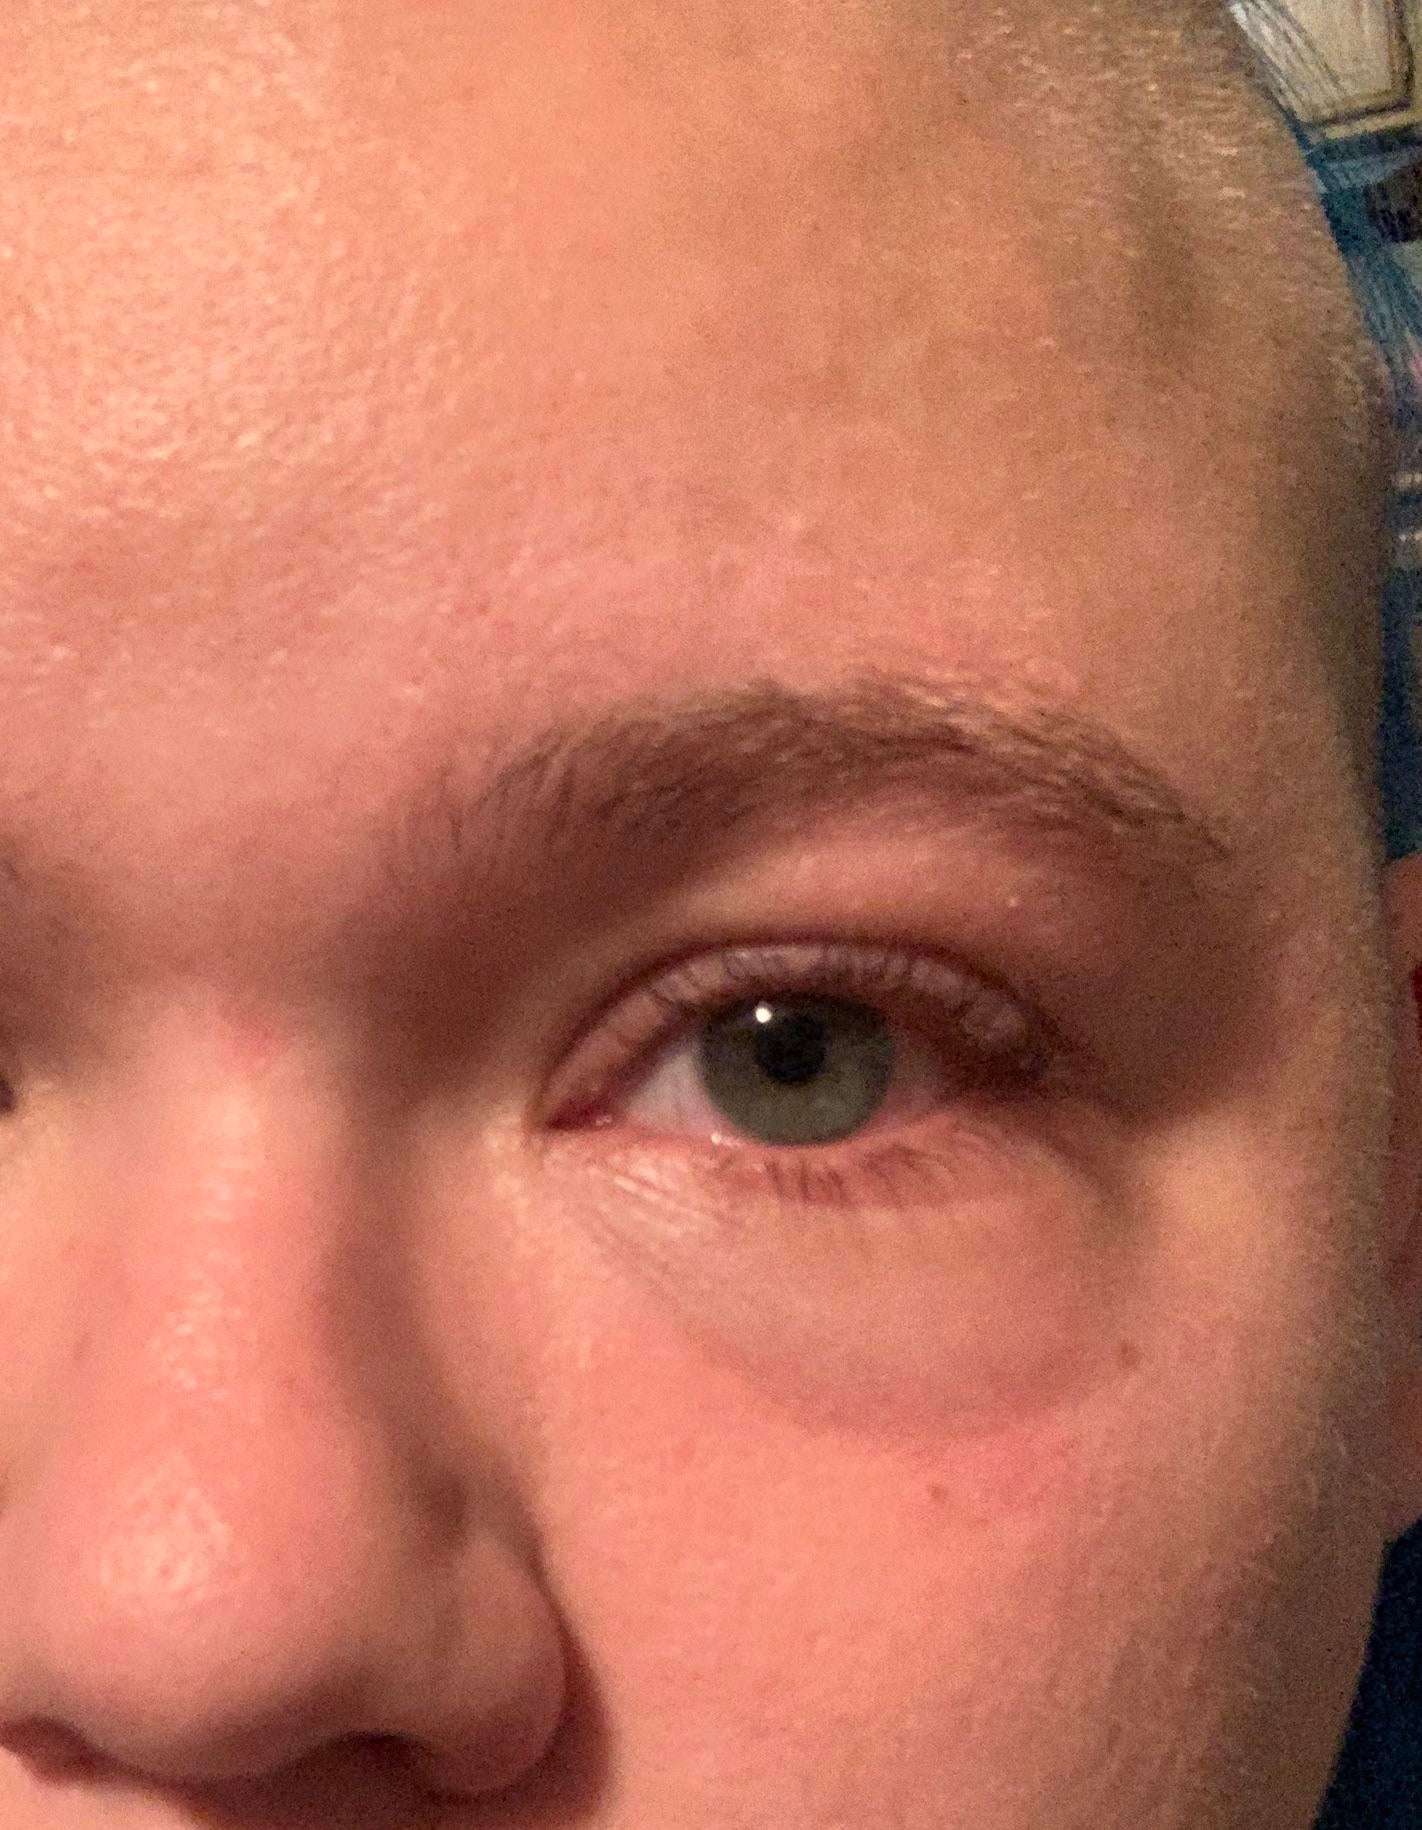 My eye has been swelling up for hours and I dont know why ...